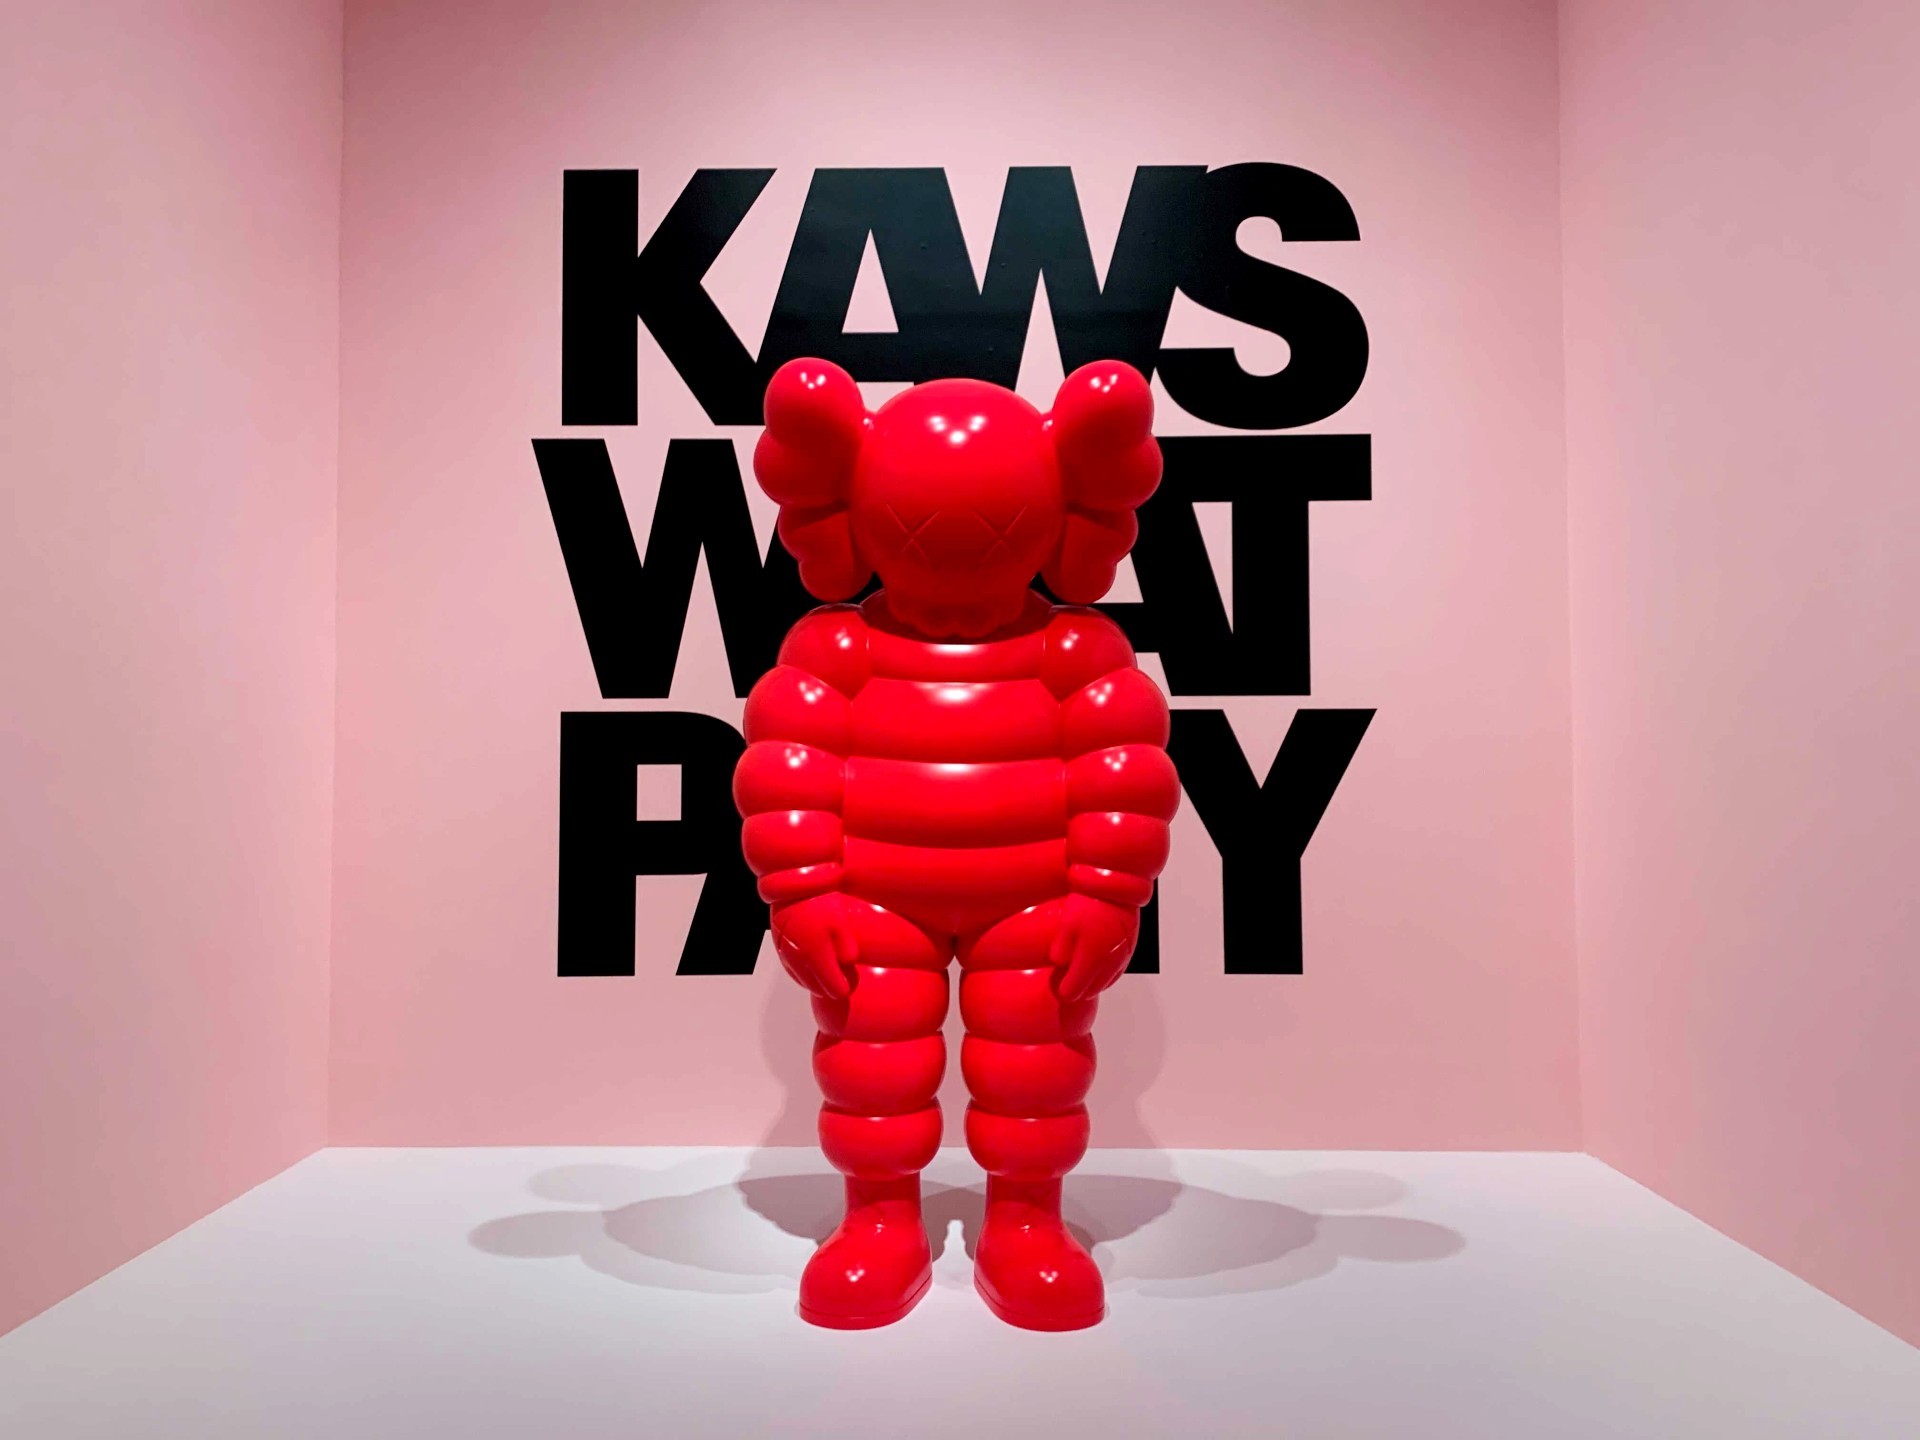 KAWS: What Party opens at the Brooklyn Museum on Friday